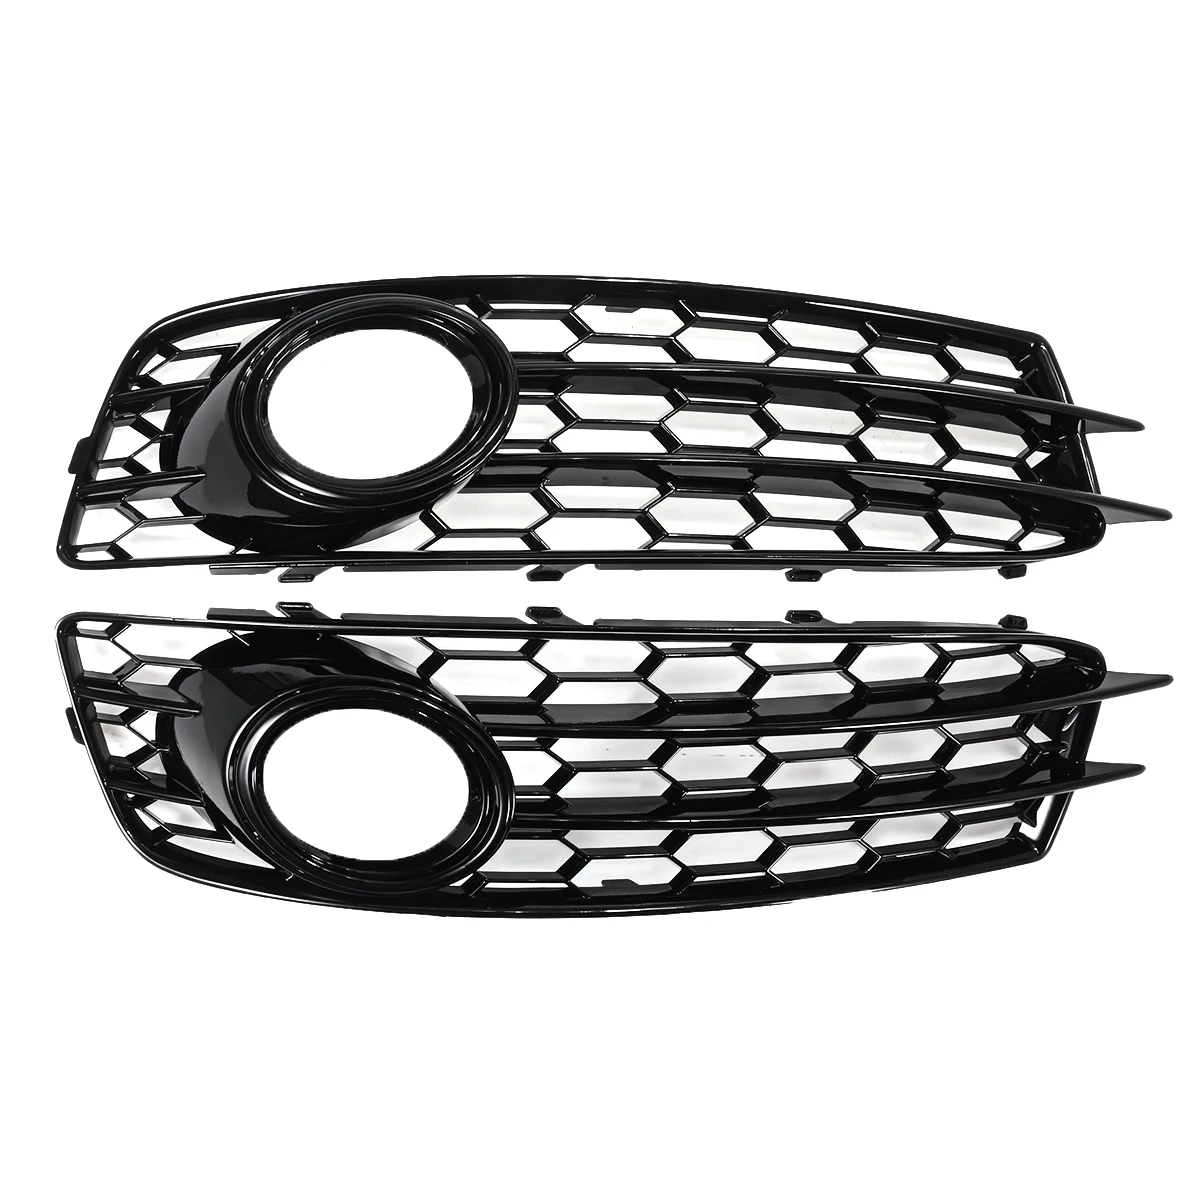 Pair HONEYCOMB Car Front Bumper Fog Light Lamp Grille Grill Cover Mesh for Audi A3 8P S-Line 2009-2012 Front Grille 8P0807682